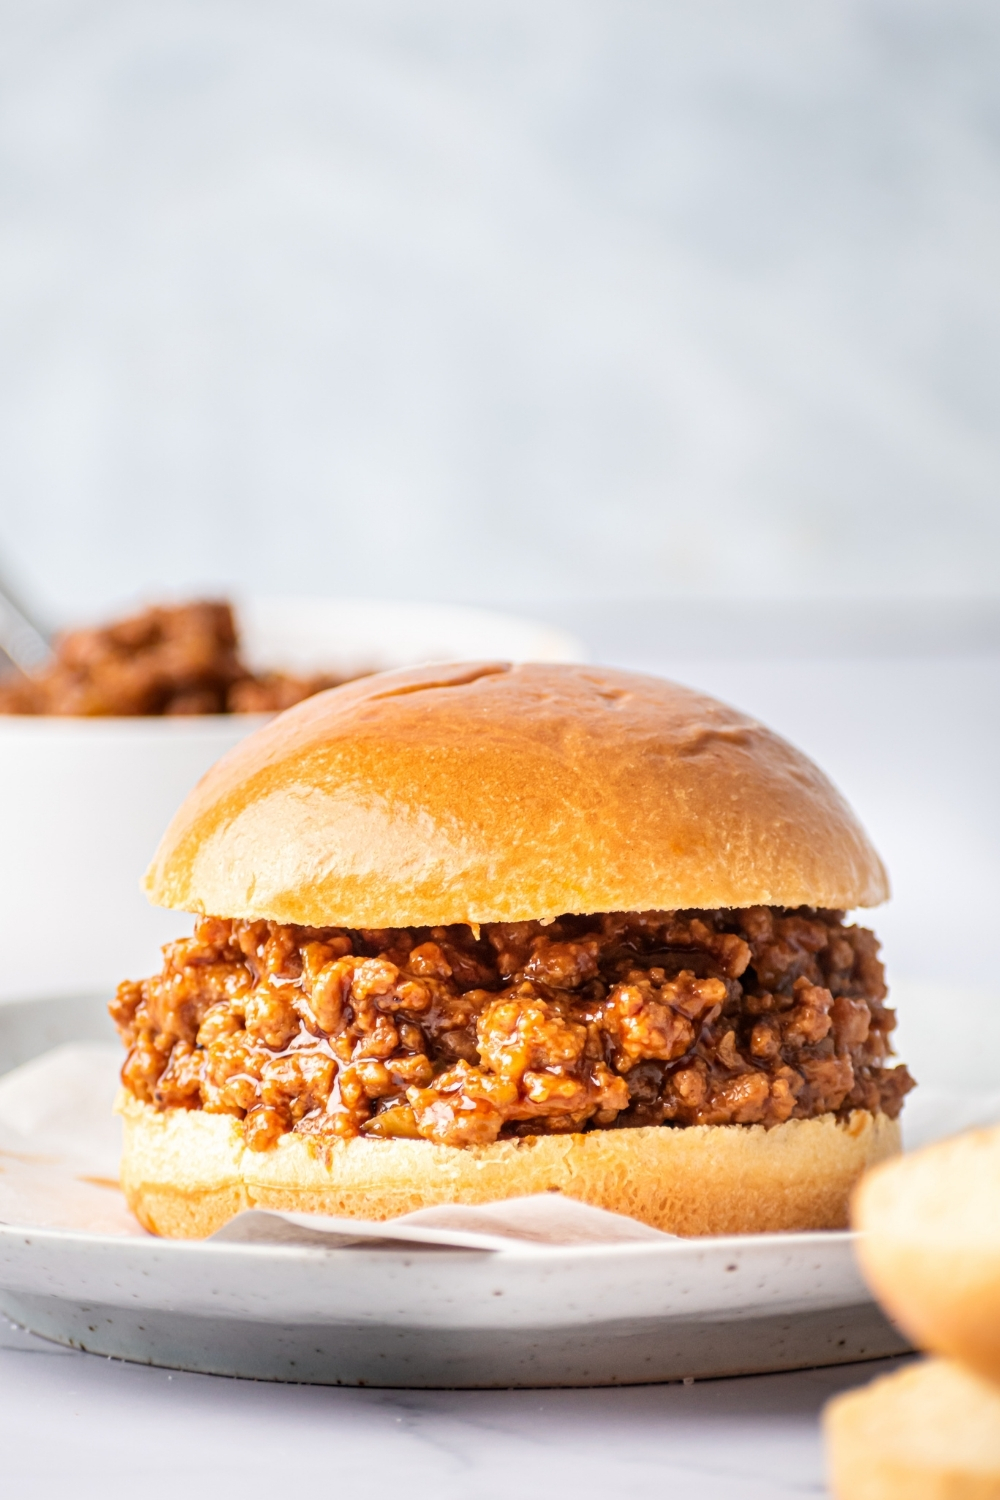 A sloppy Joe on a piece of parchment paper on a gray plate. Behind it is part of our bowl filled with sloppy Joes.